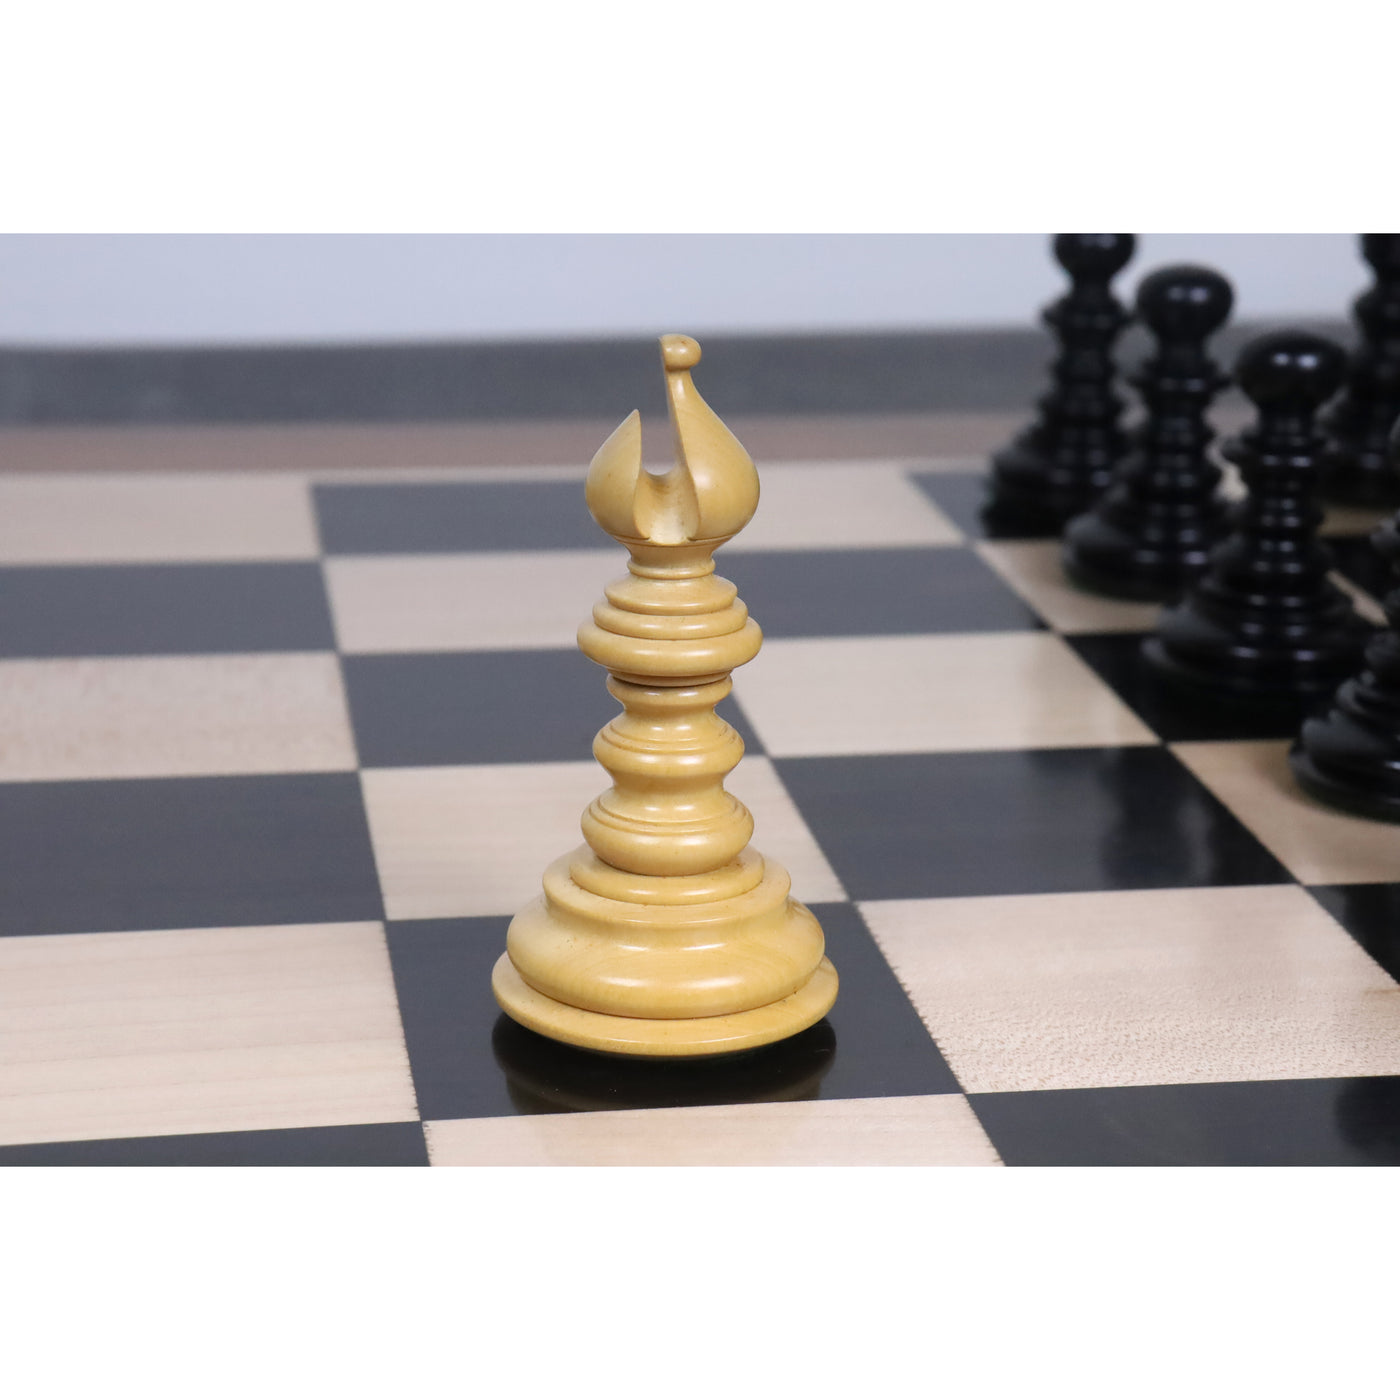 Combo of 4.3" Marengo Luxury Staunton Chess Set - Pieces in Ebony Wood with Board and Box